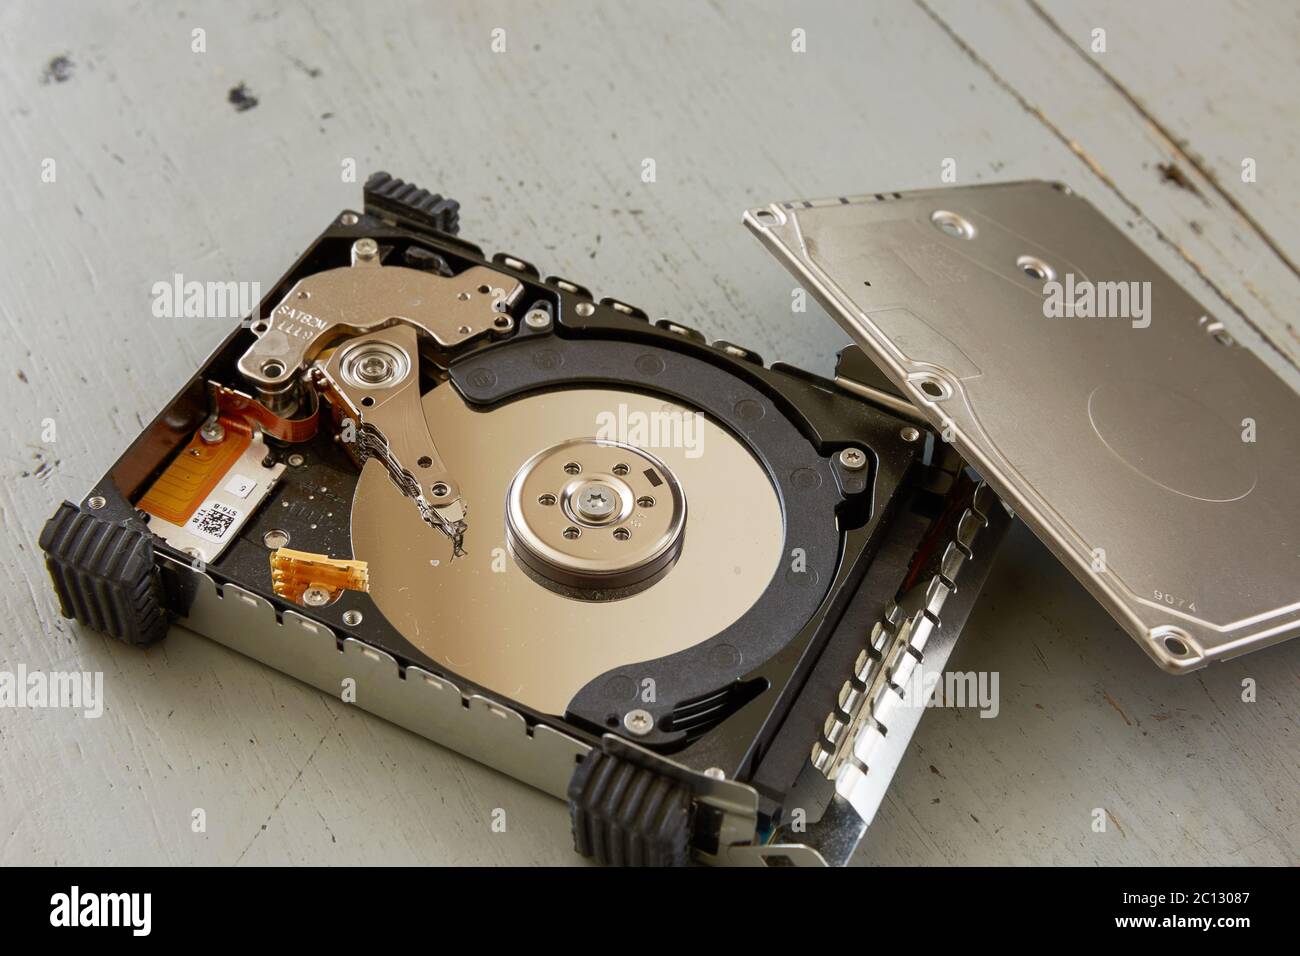 Close Up of Broken and Destroyed Hard Drive Disk on Wooden Table Stock Photo